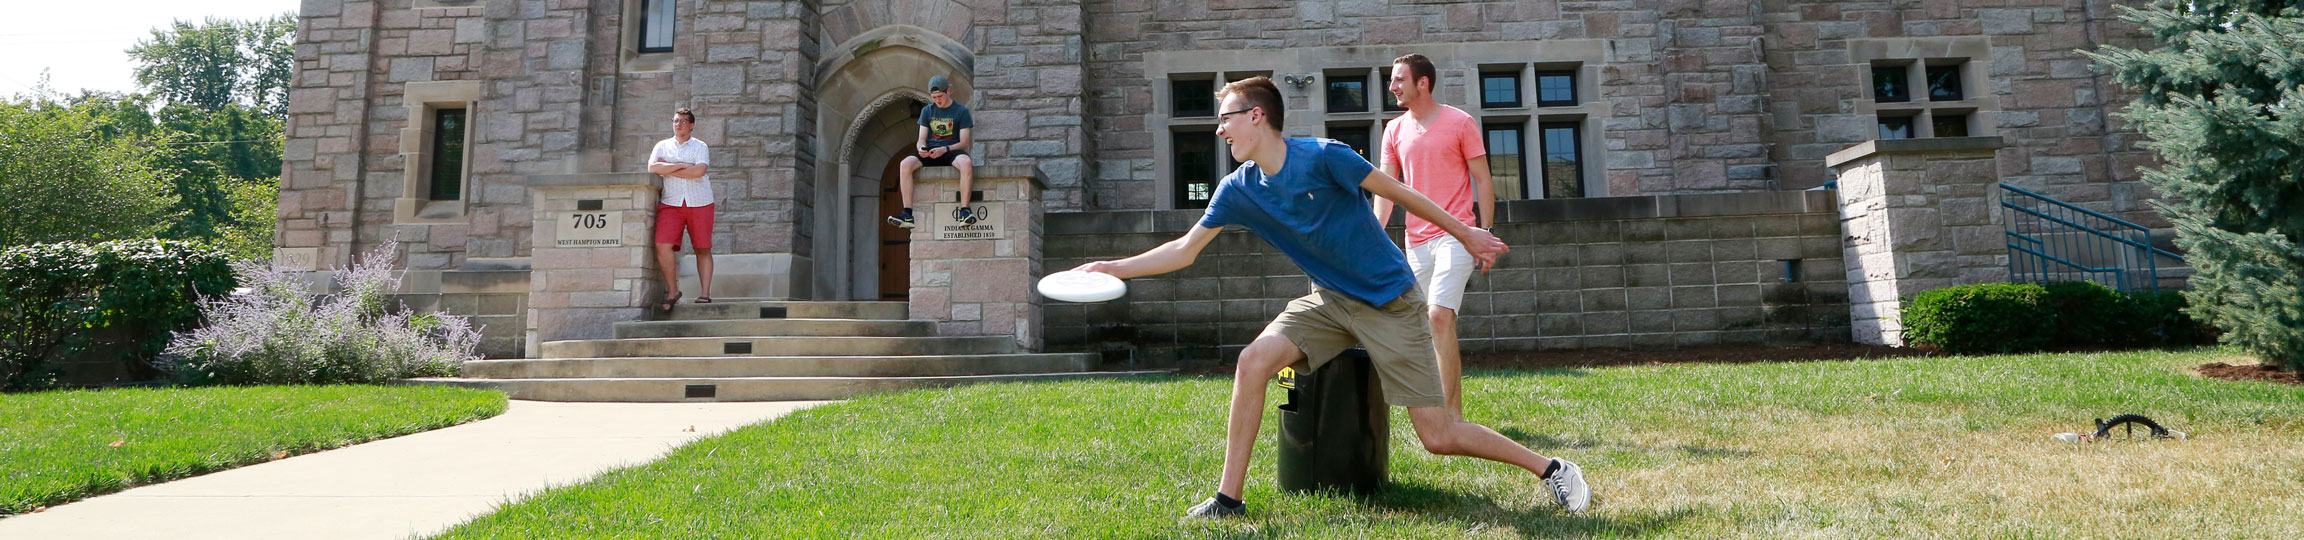 Students play frisbee in front of a campus building